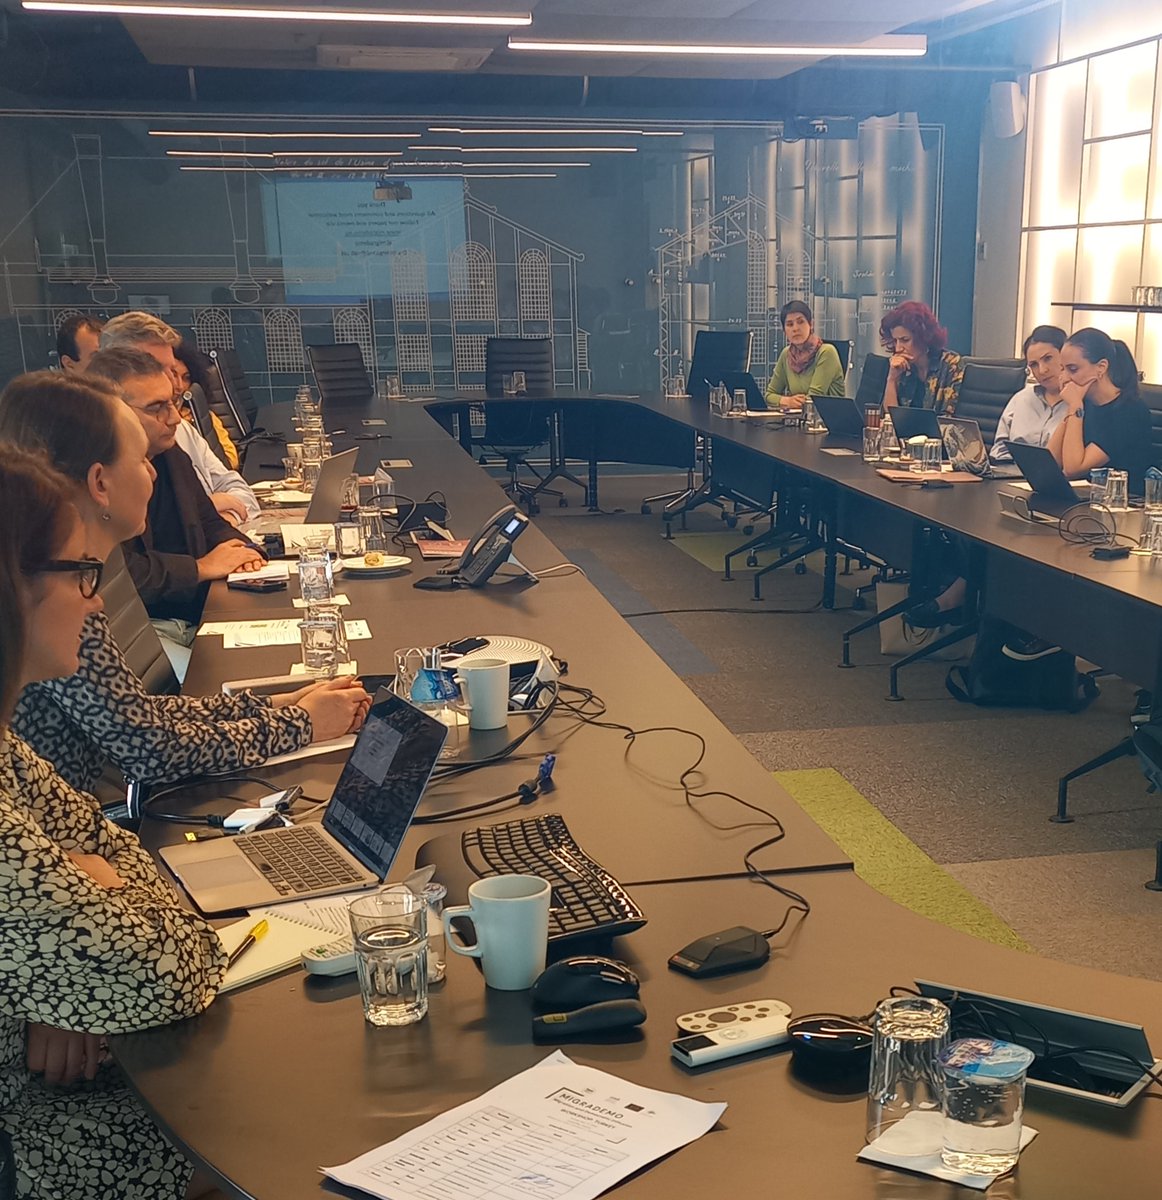 Today, the @migrademo Project workshop took place at @BiLGiOfficial, where attendees engaged in discussions on the project’s preliminary findings. @ERC_Research @EvaOstergaard @cpa_uab